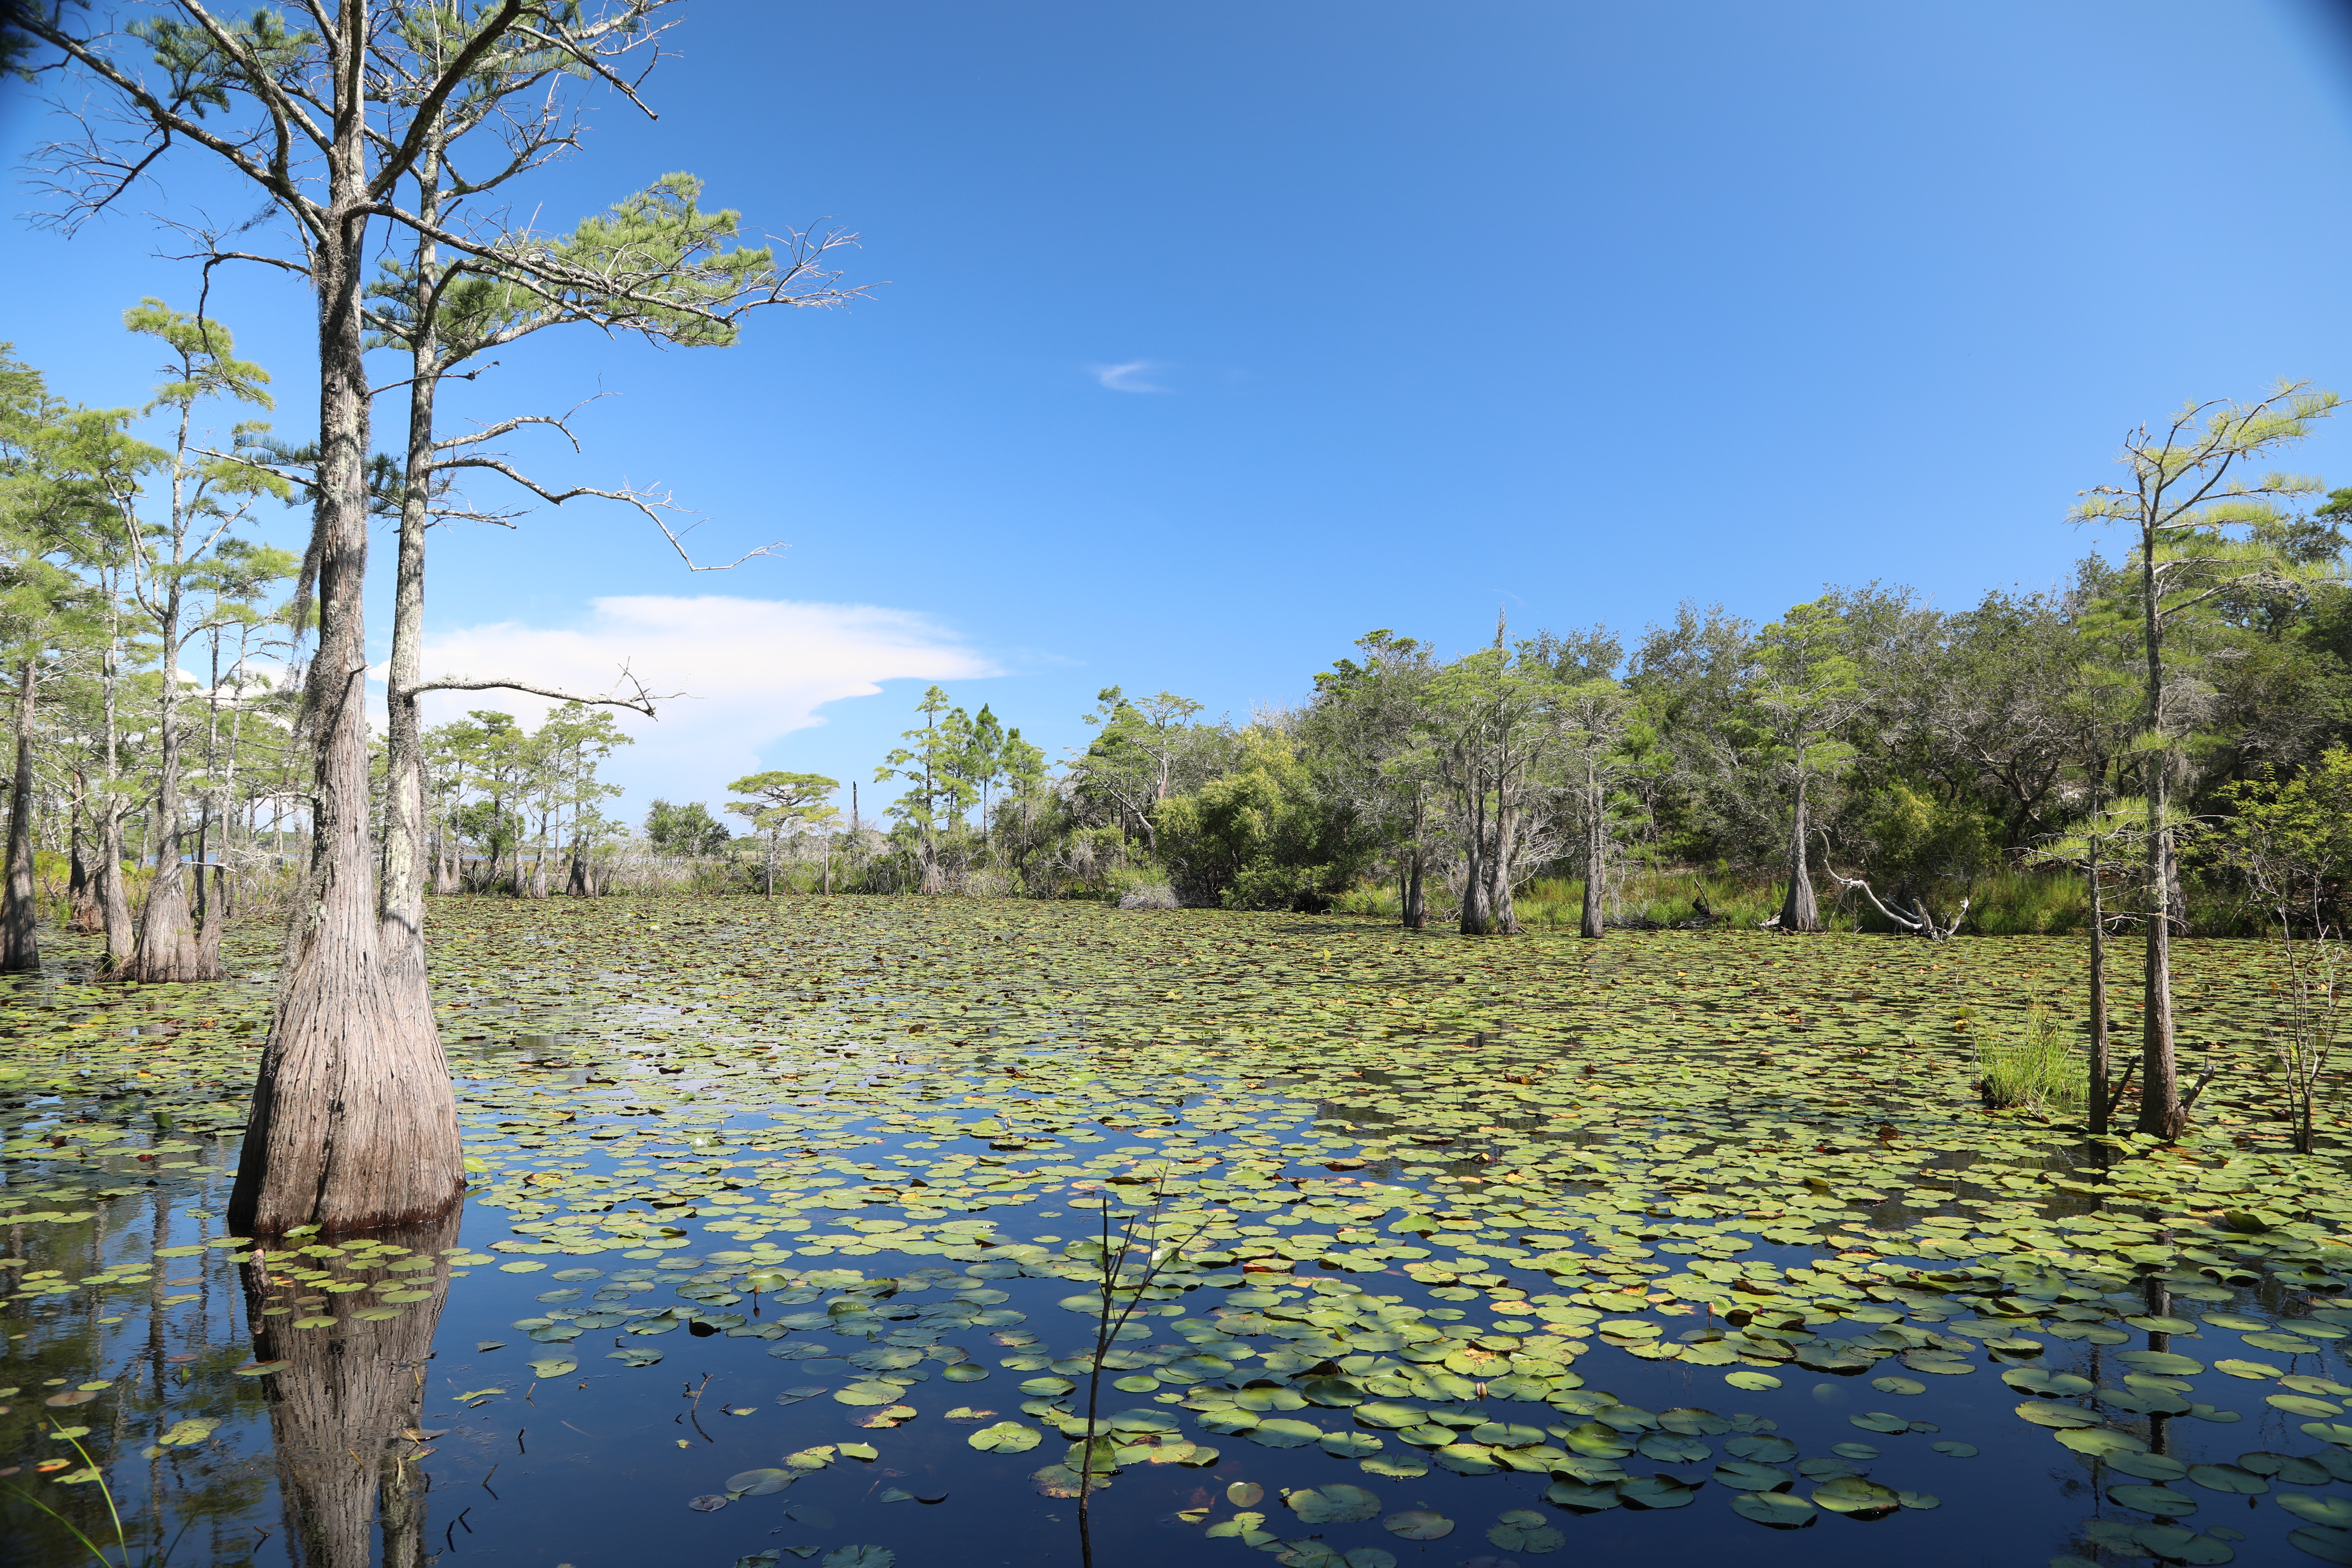 Water lilies cover calm water. Bald cypress line the waters edge. 